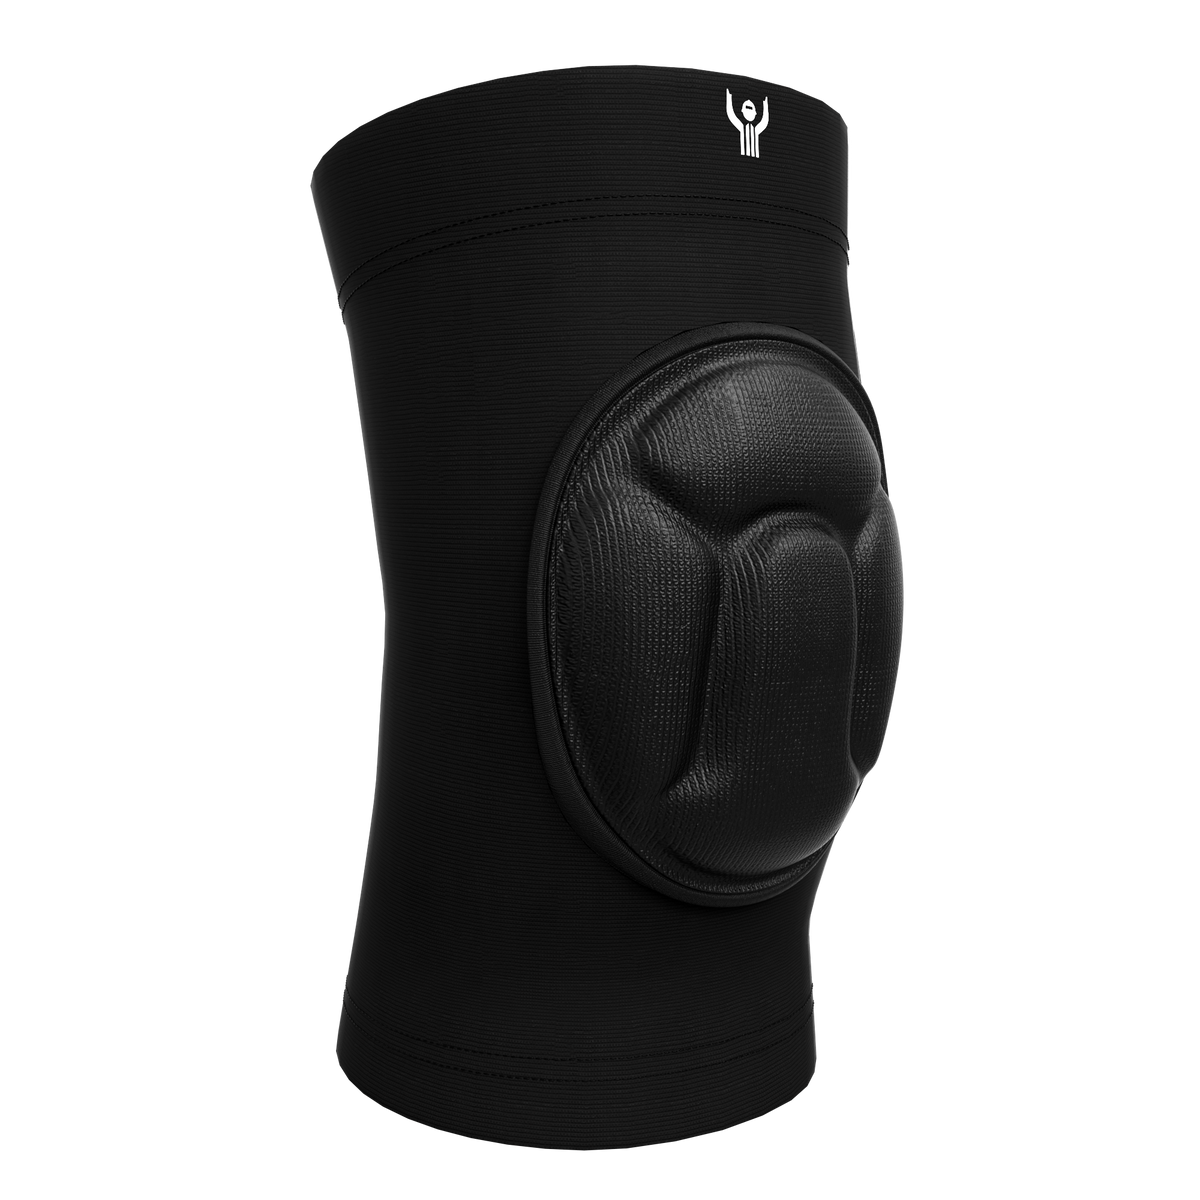 Side view of Black Kneepad for Cliff Keen Wrestling Kneepad For High Schools and College